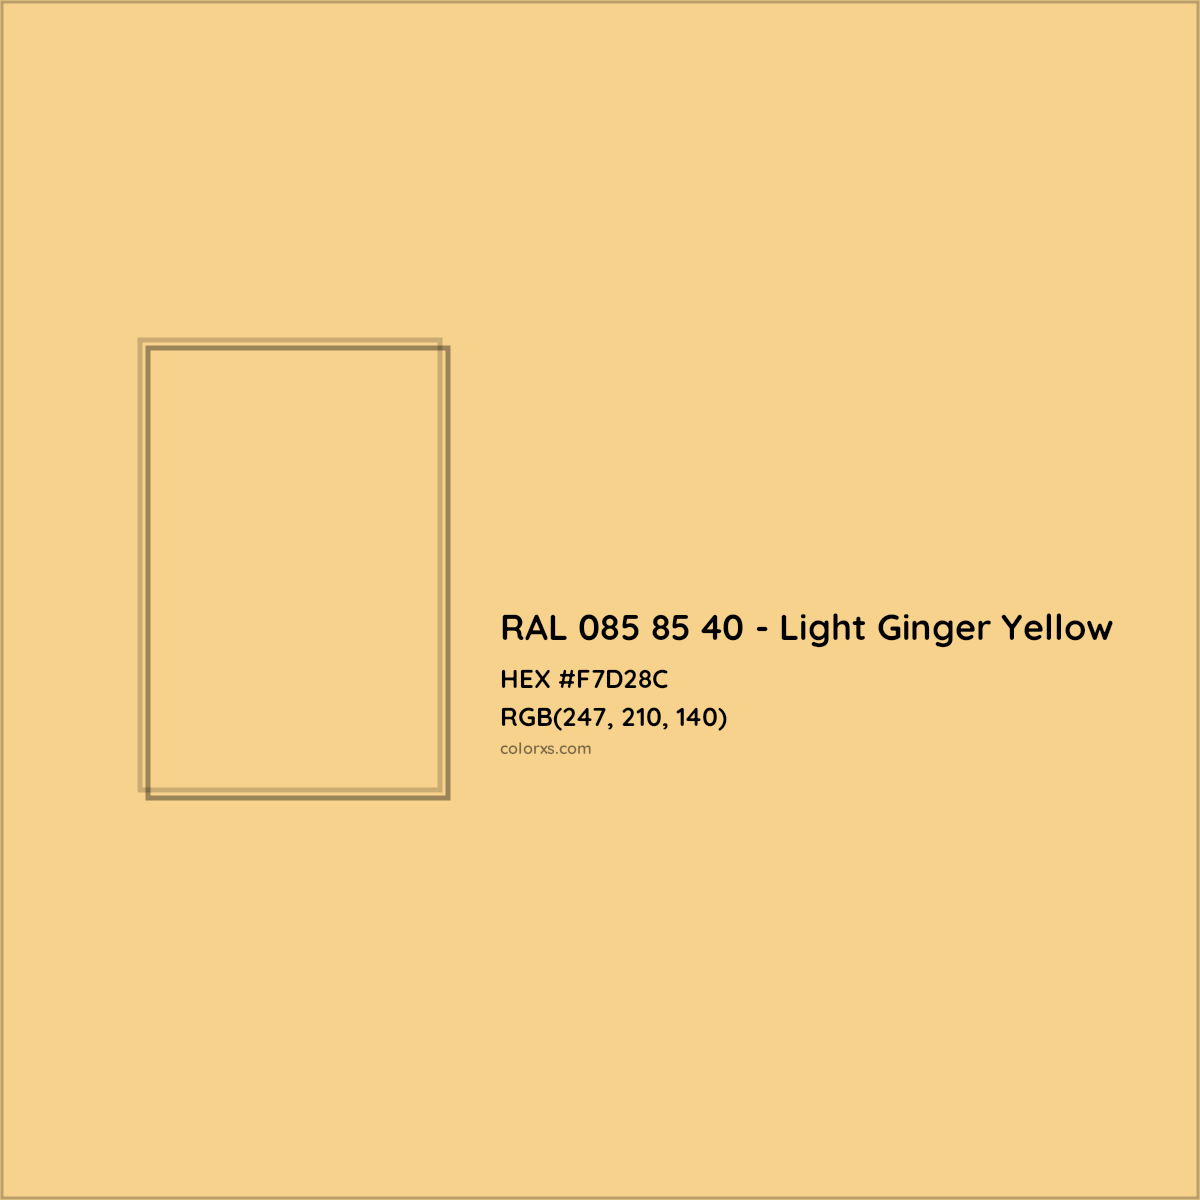 HEX #F7D28C RAL 085 85 40 - Light Ginger Yellow CMS RAL Design - Color Code